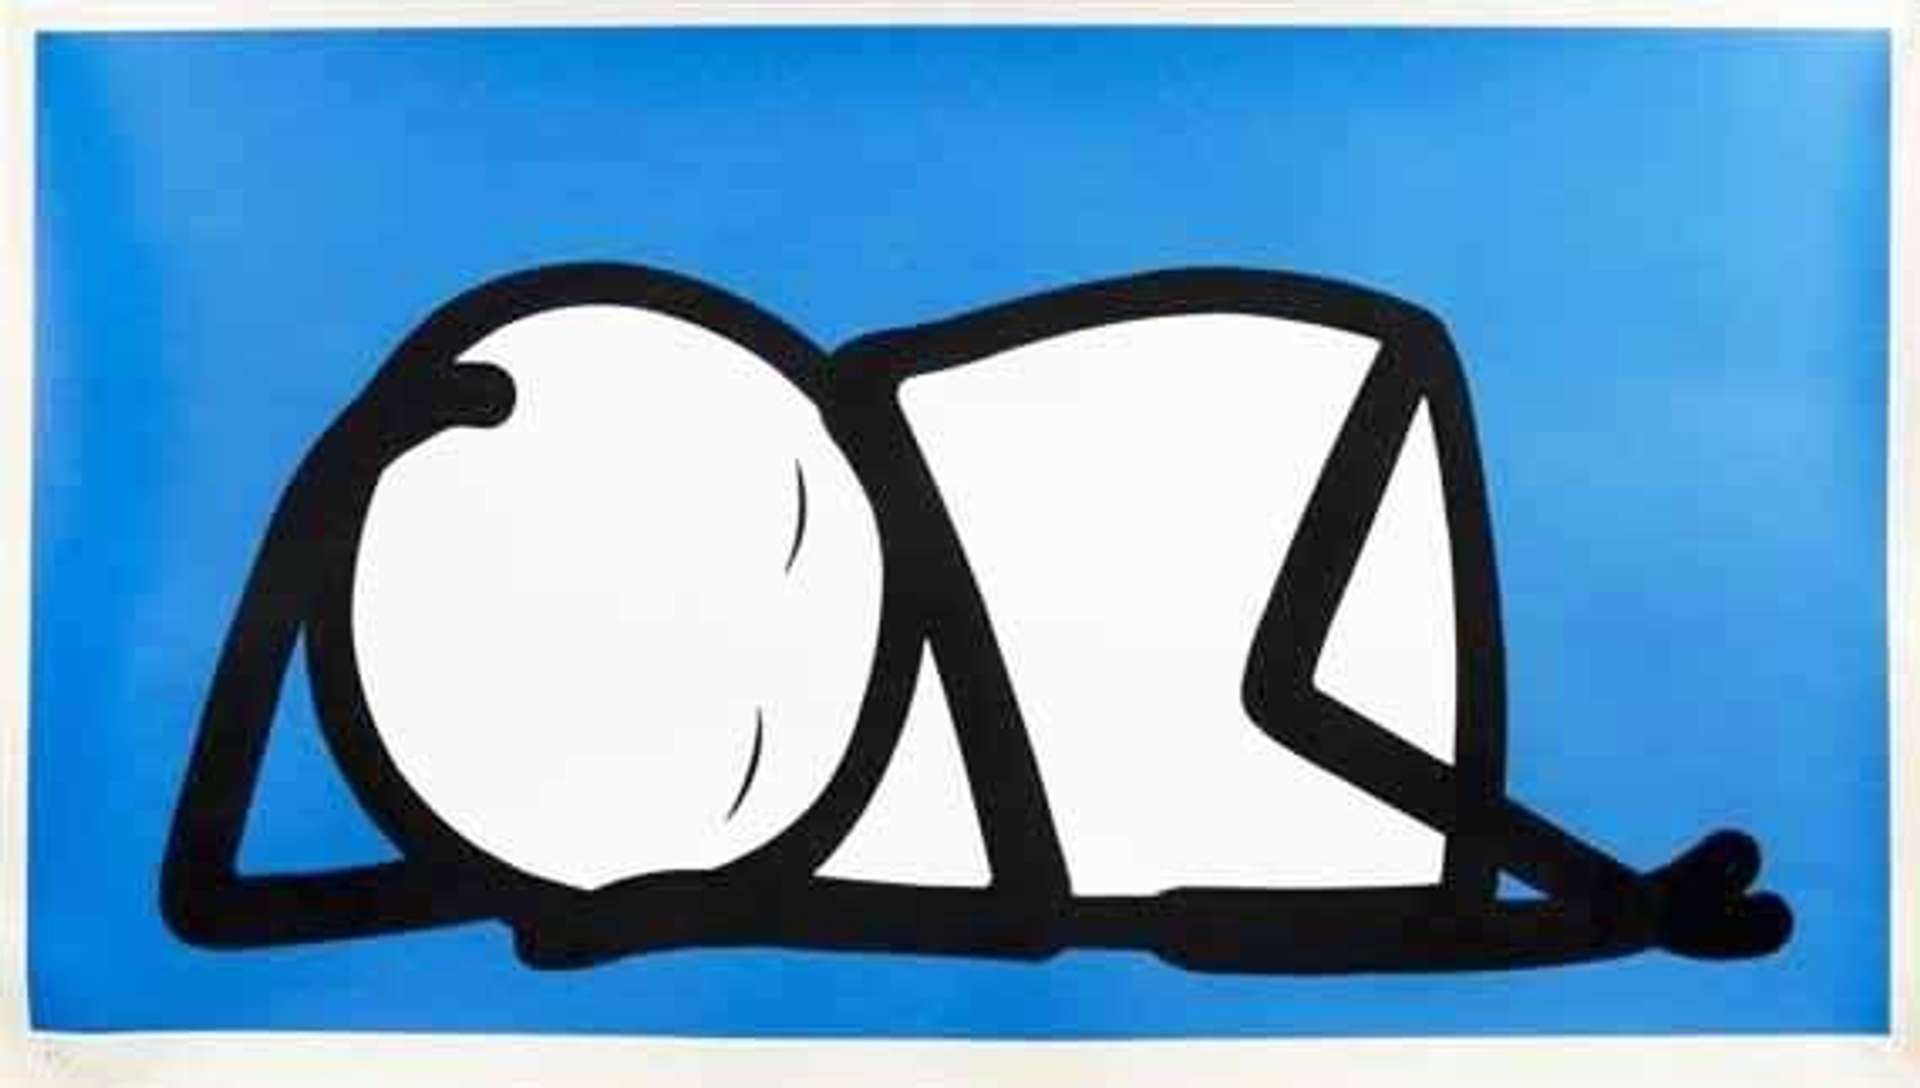 Stick figure of a reclining figure against an NHS blue background